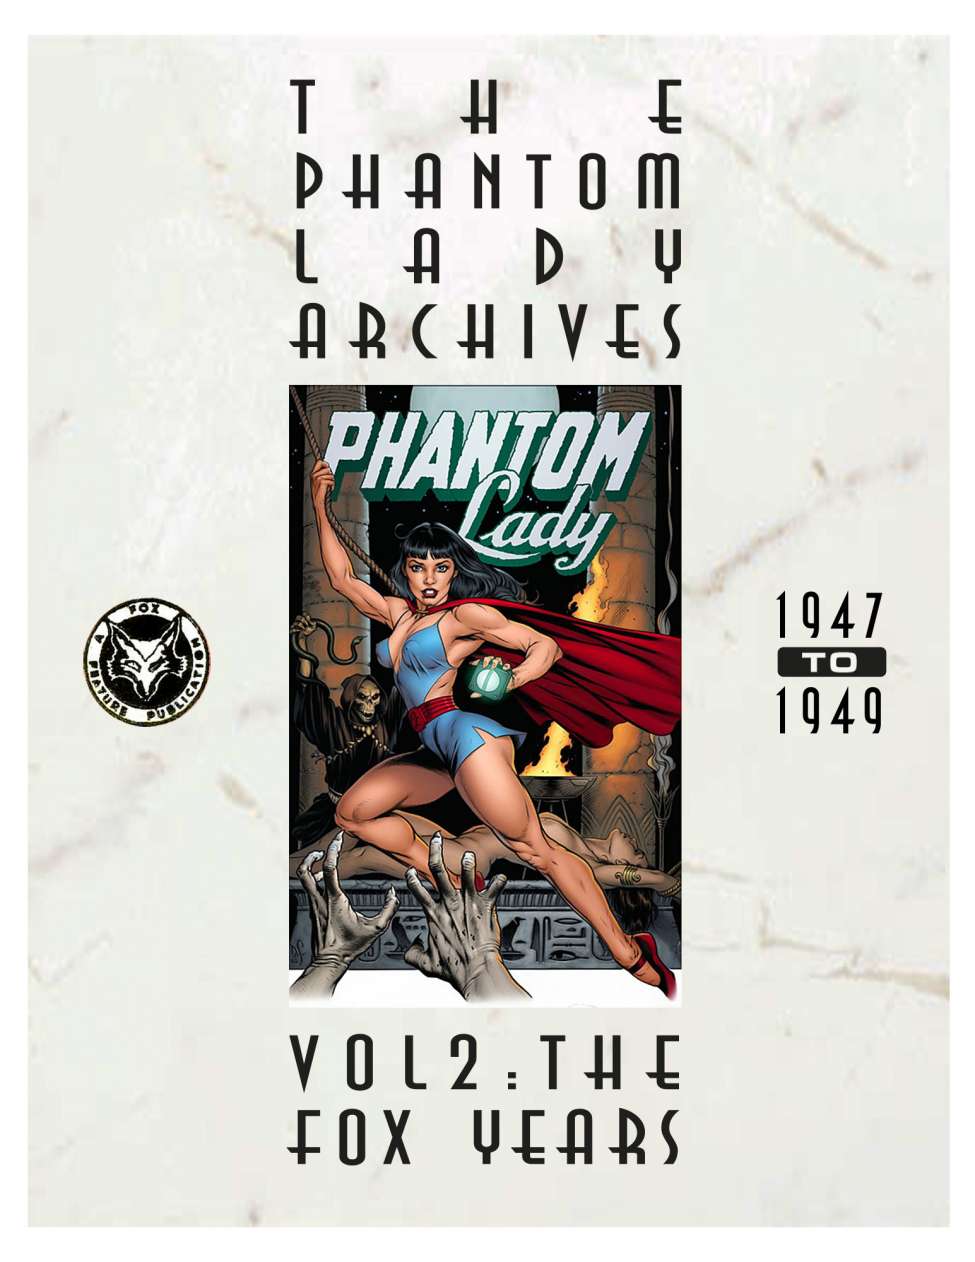 Book Cover For Phantom Lady Archives v2.1 - The Fox Years